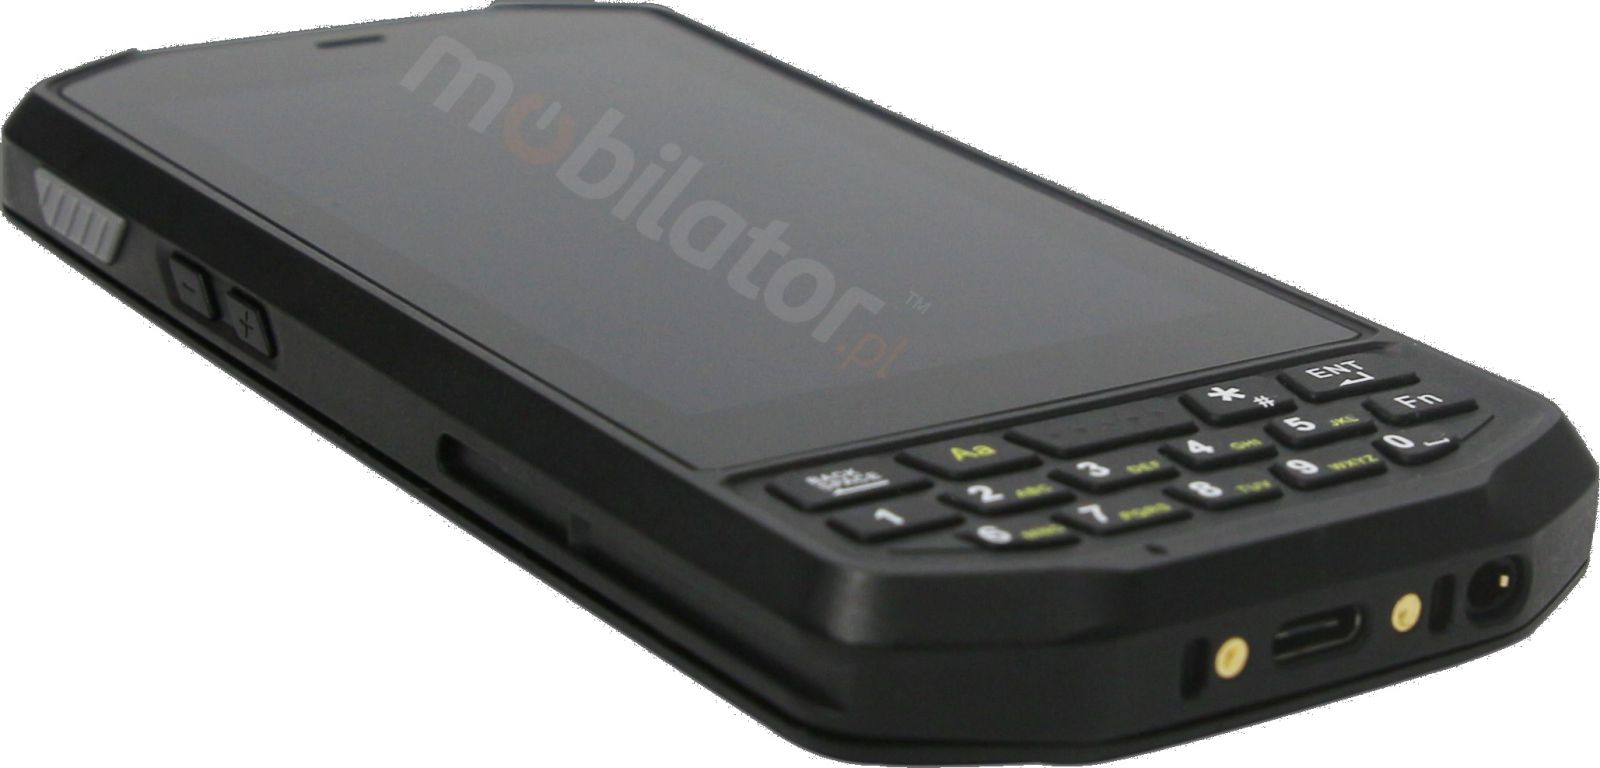 Mobipad Qxtron 4100 v.6 - Industrial data terminal (IP65 + MIL-STD-810G) for production with a UHF scanner and a Zebra 4710 2D code reader, 4GB RAM and a 64GB disk